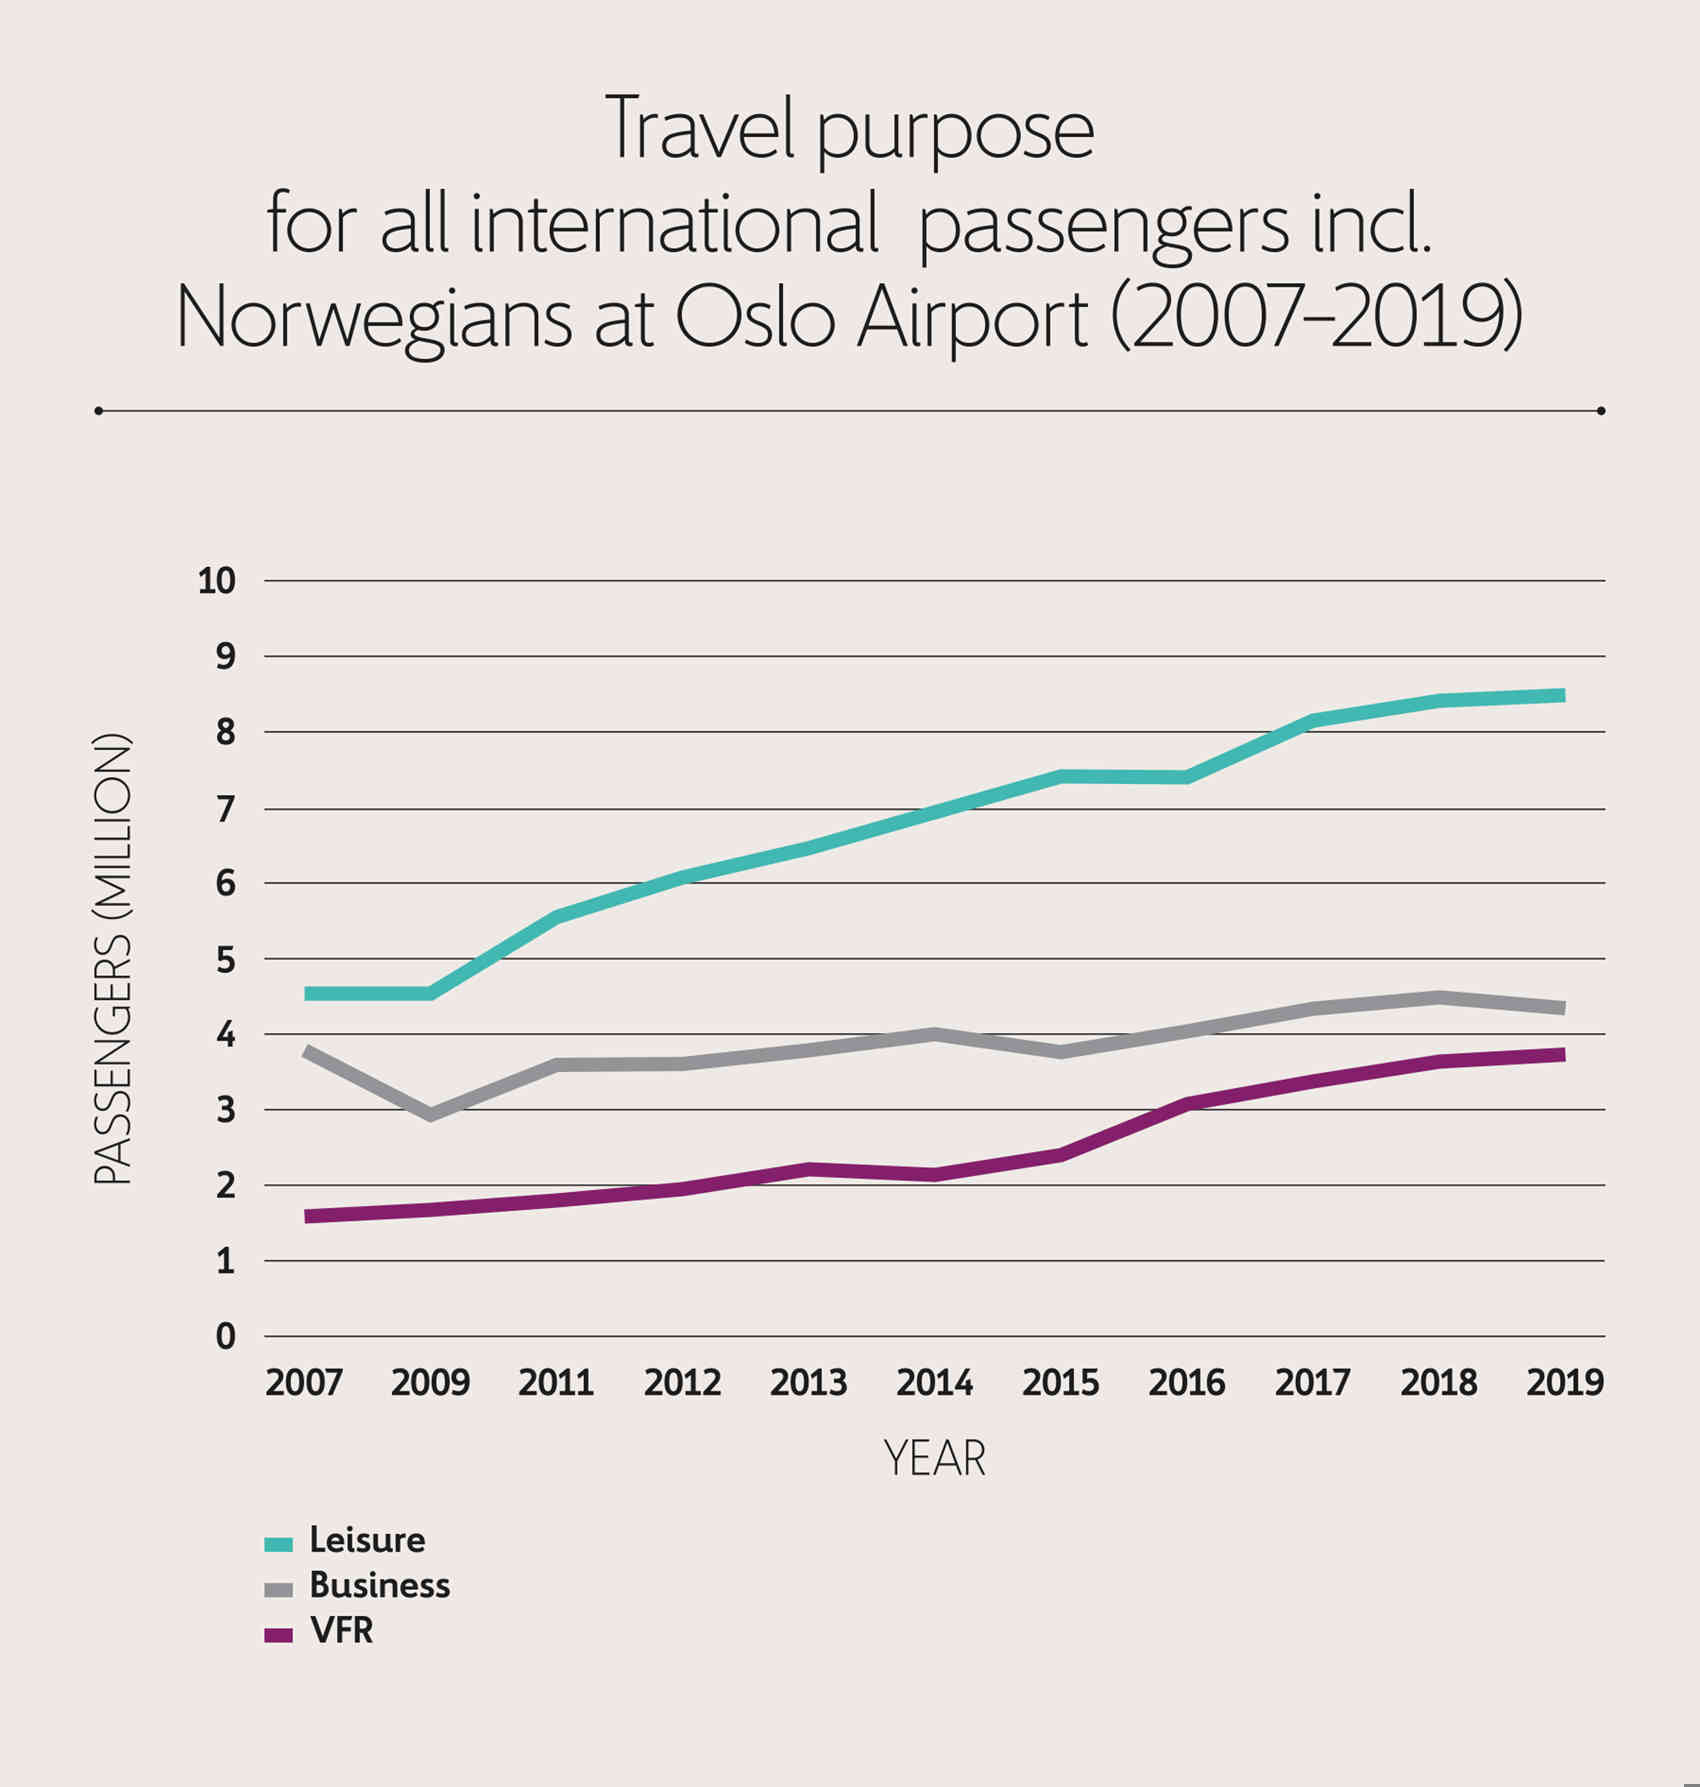 Travel purpose for all international passengers (including Norwegians): From 2007-2019, leisure and VFR travel have risen steadily. Business travel has remained constant.